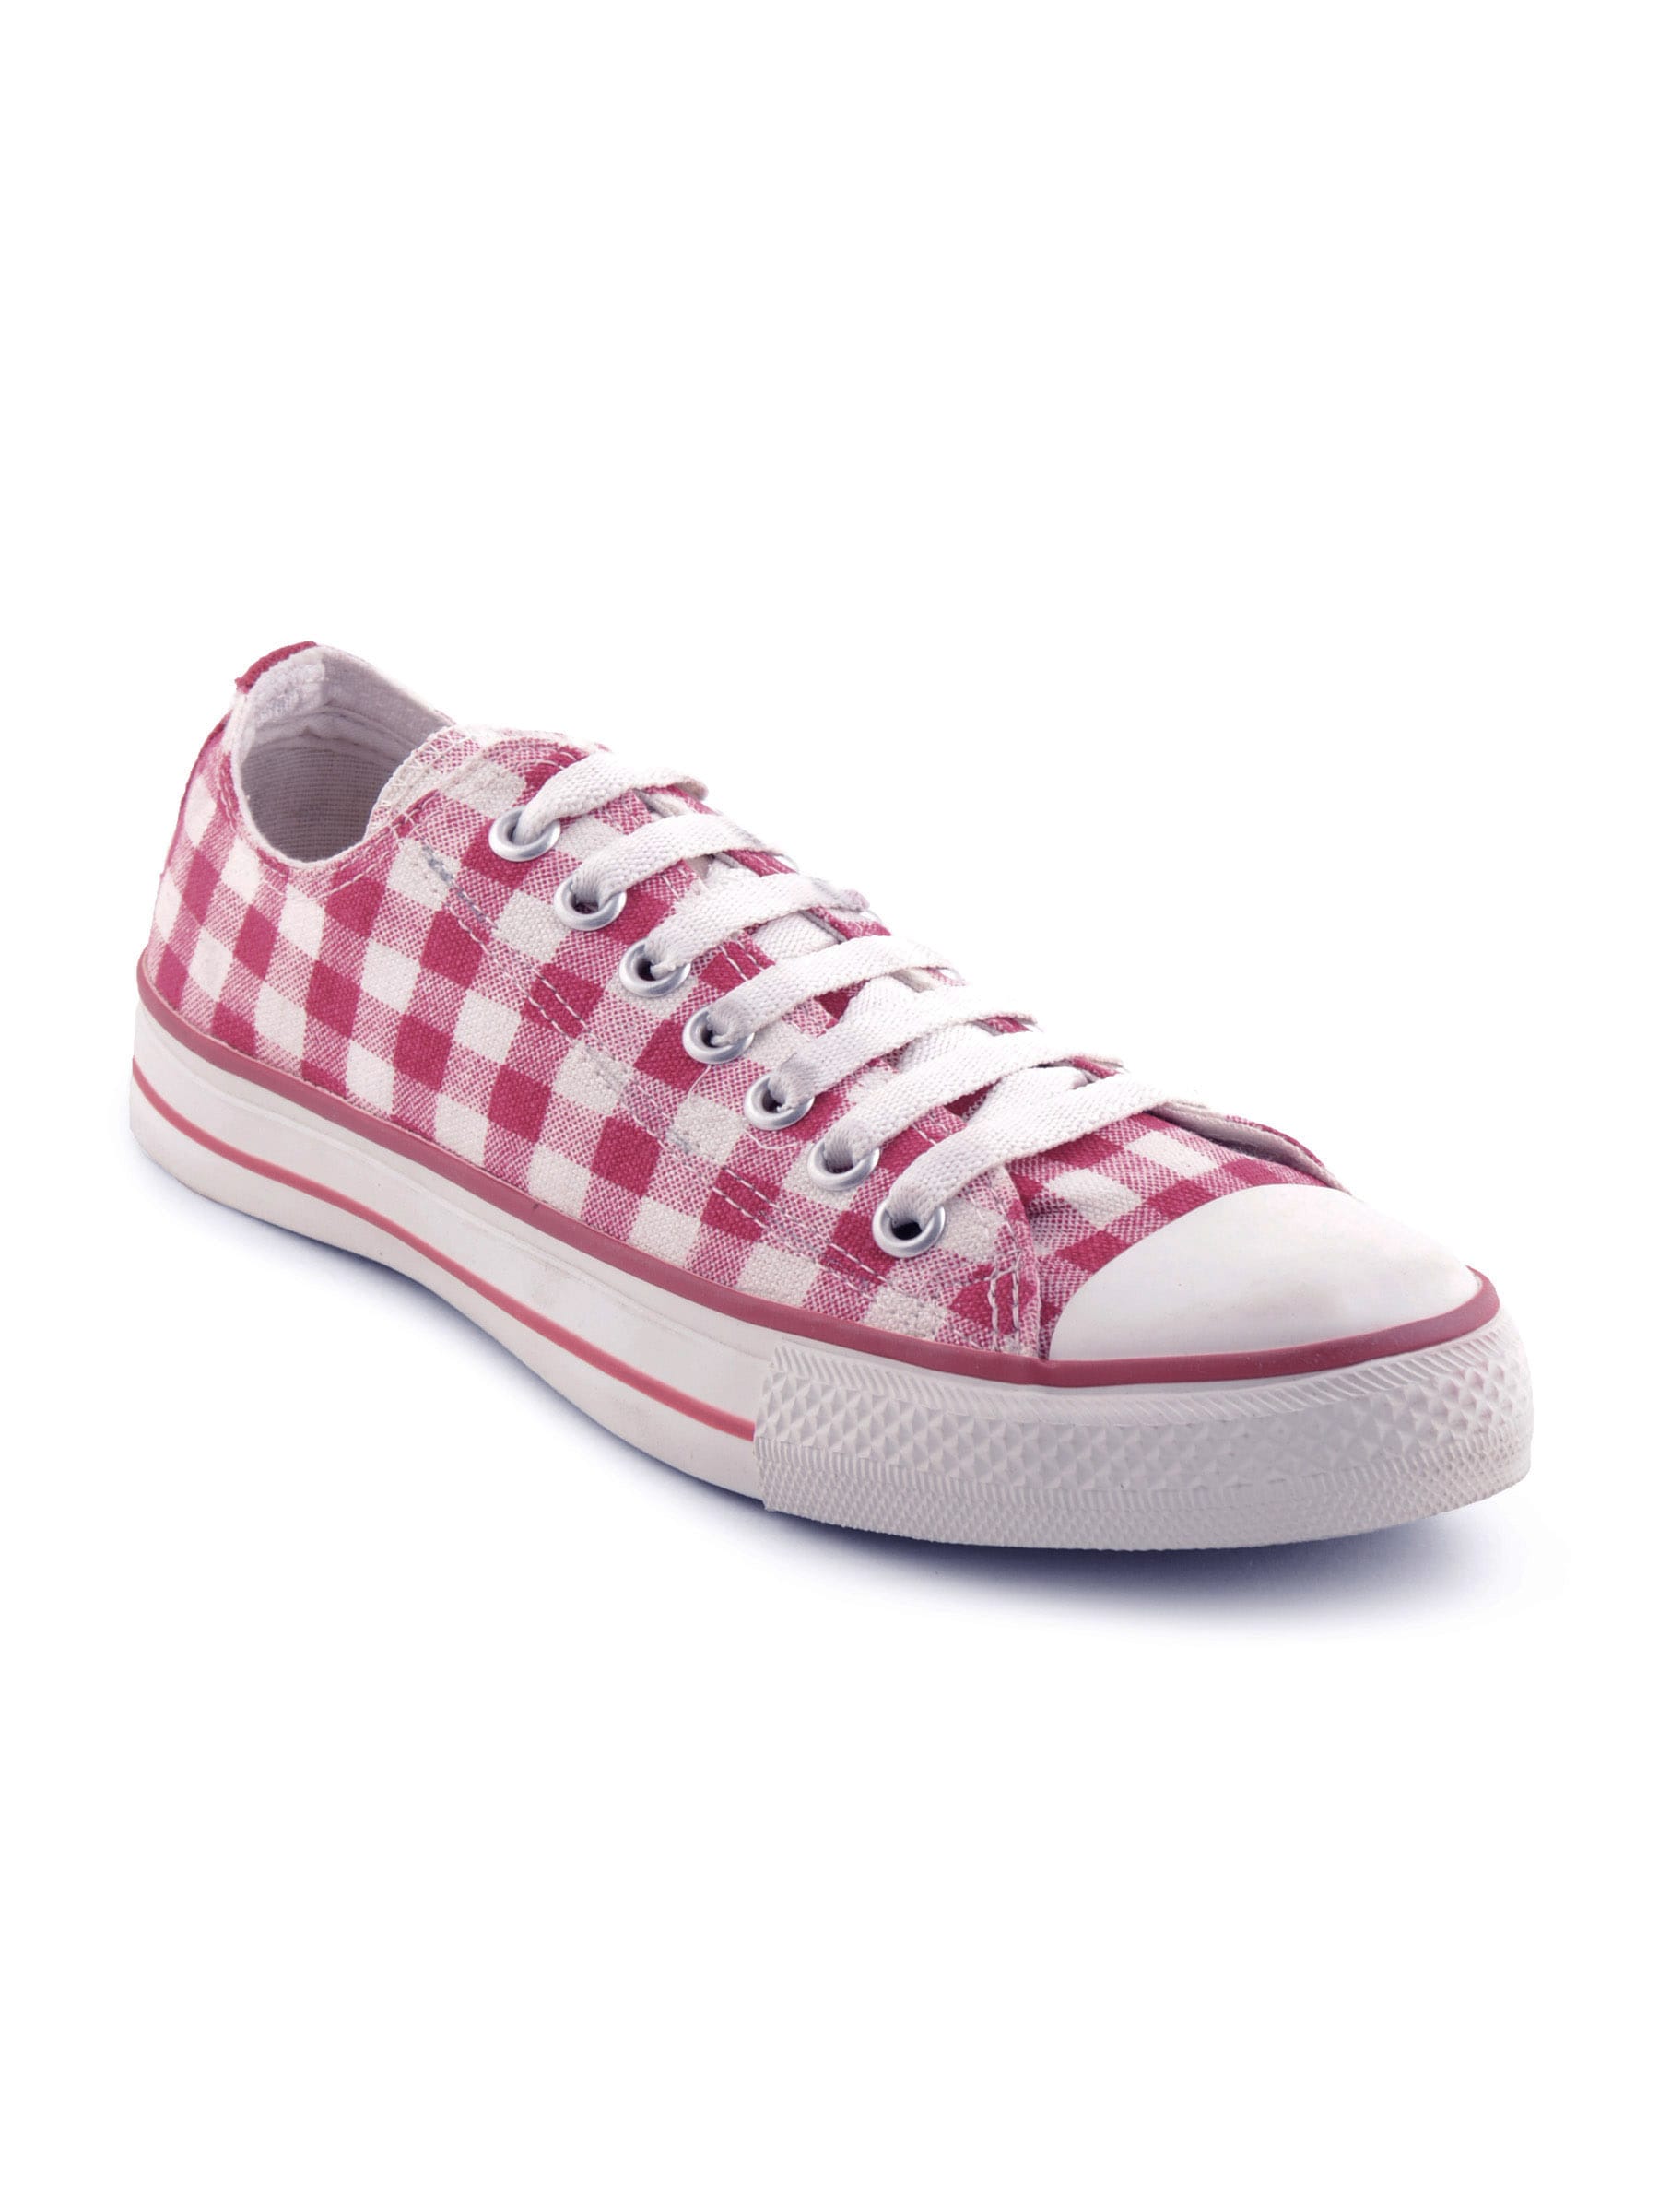 Converse Unisex Plaid Check Ox Red Shoes